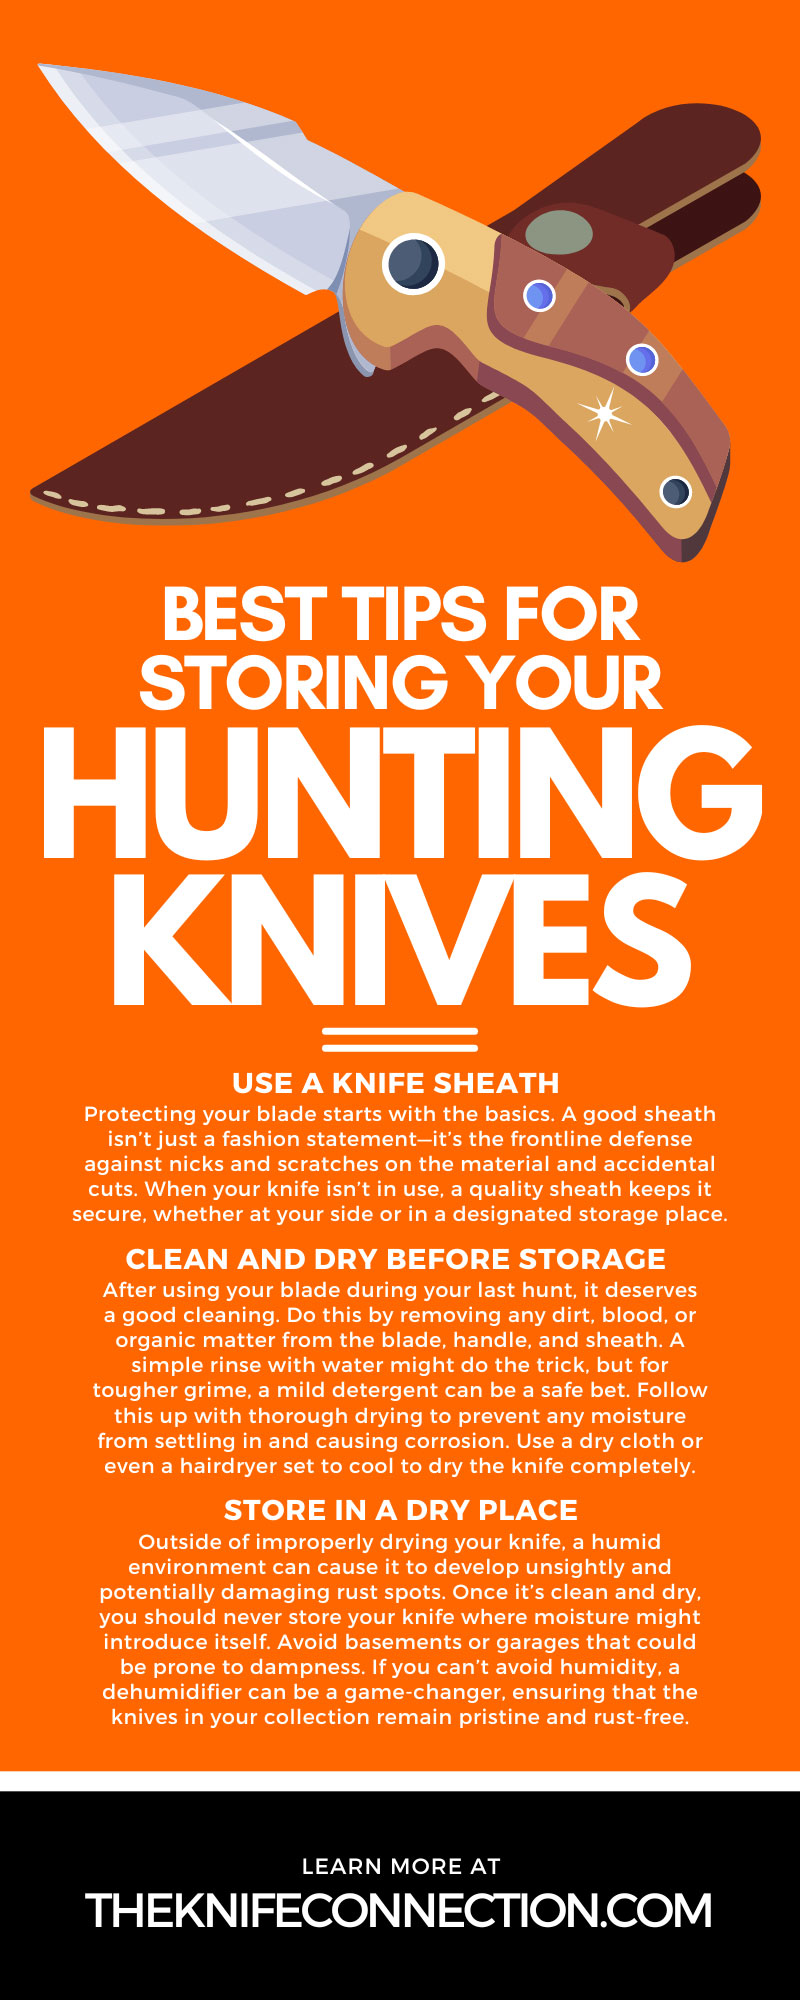 10 Best Tips for Storing Your Hunting Knives